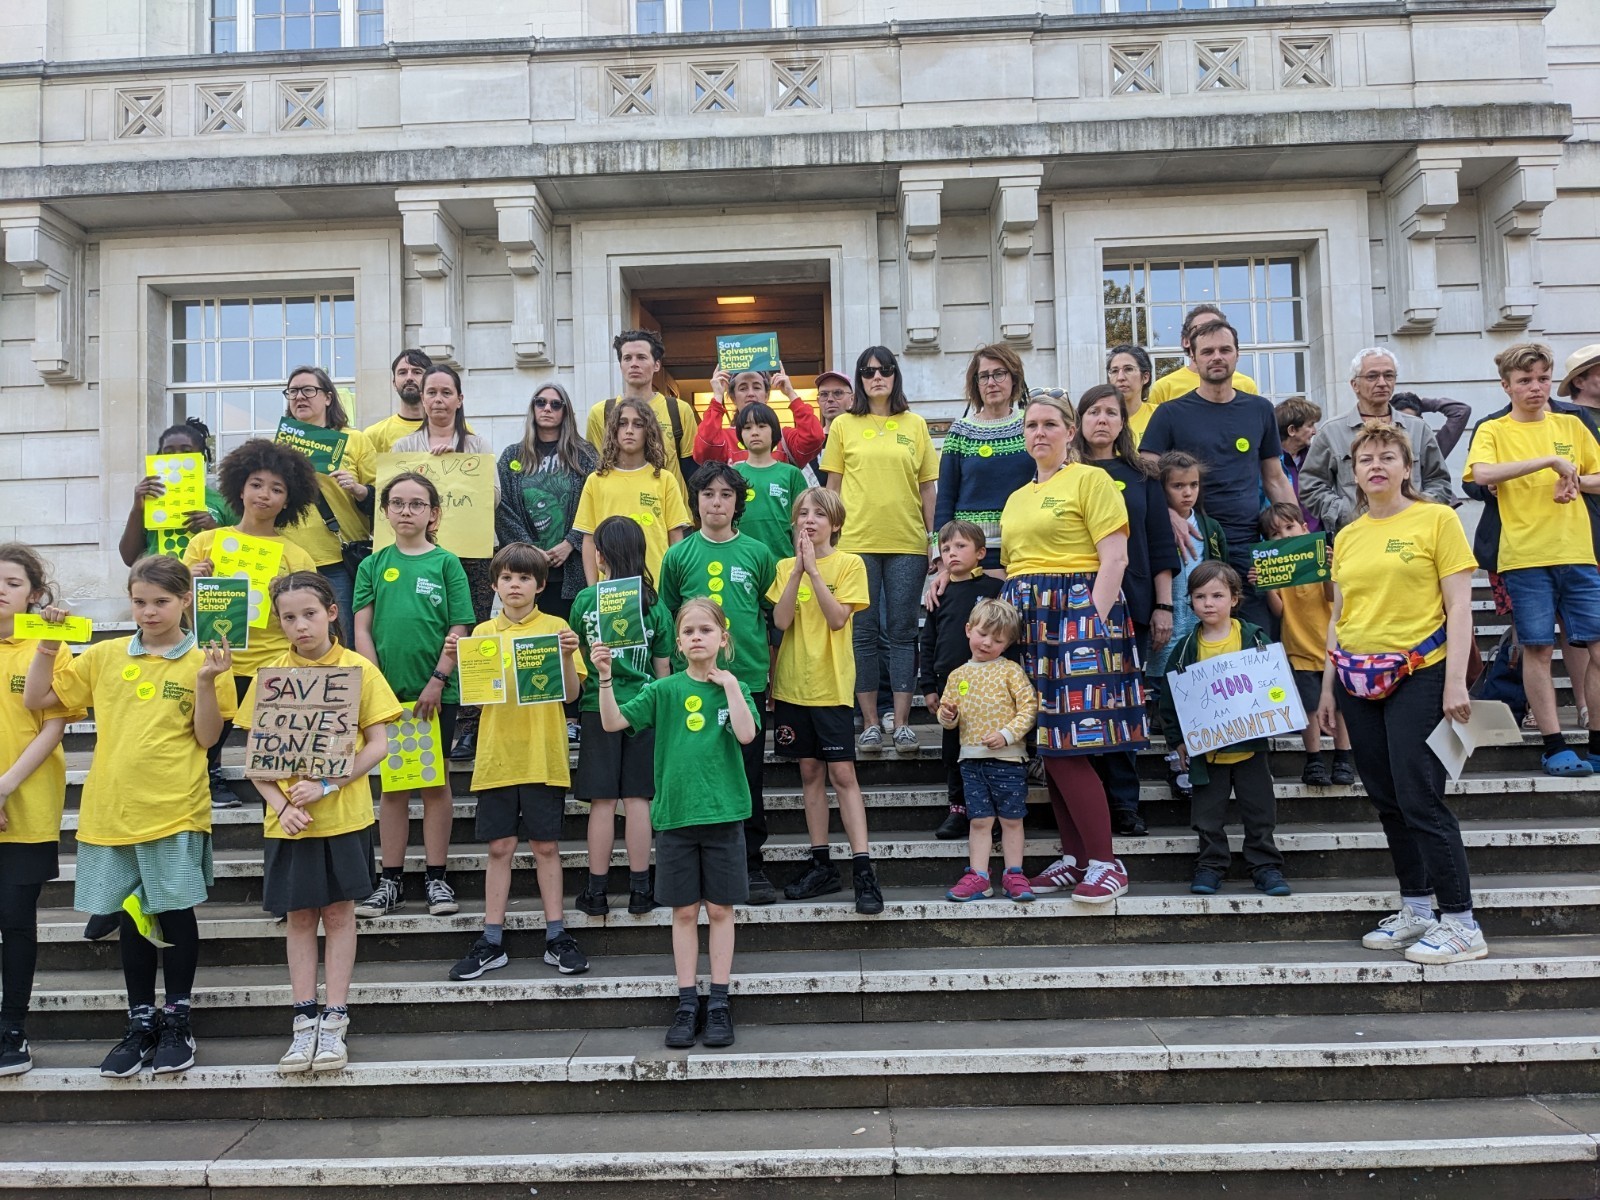  Colvestone parents and children take their message to Hackney Councils cabinet over plans to merge the school due to falling pupil numbers. Photo: Julia Gregory